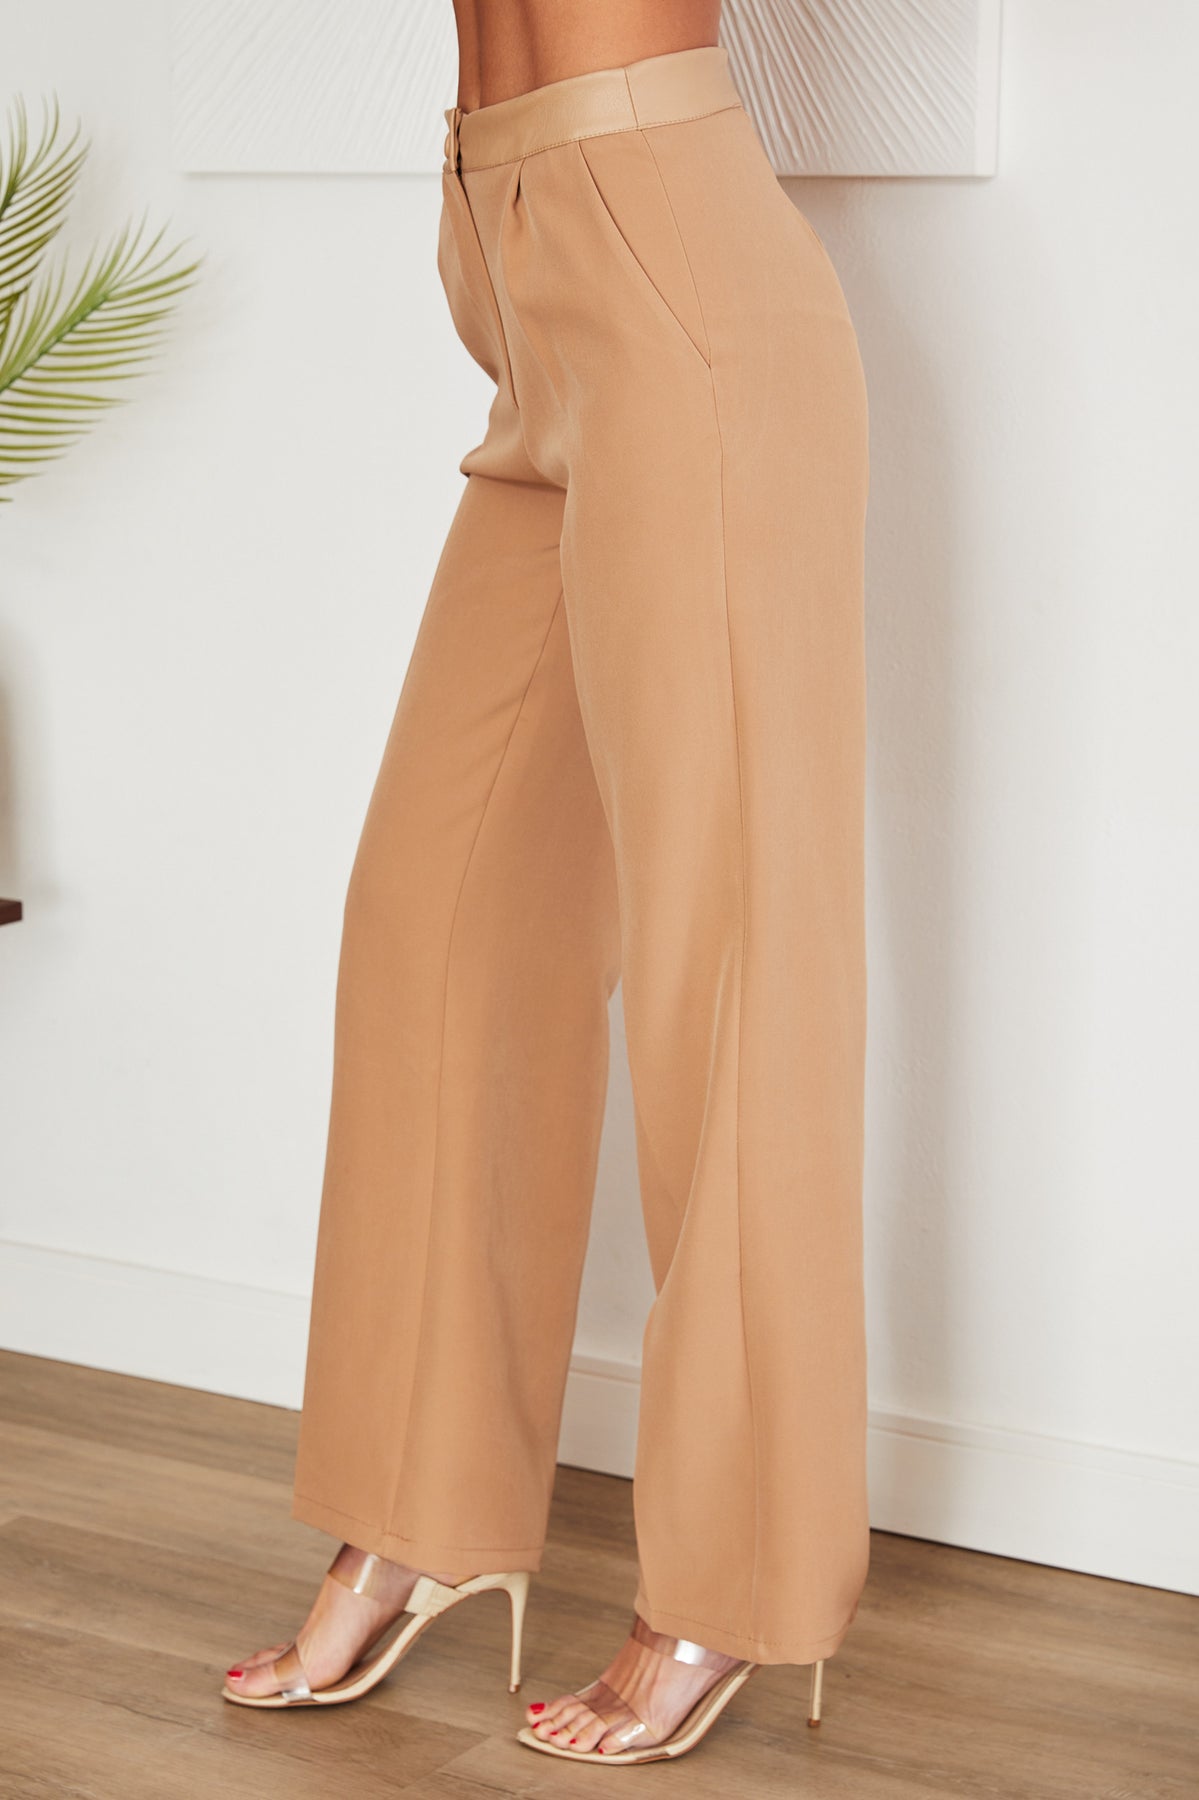 The Jora Faux Leather High Waist Legging In Camel • Impressions Online  Boutique